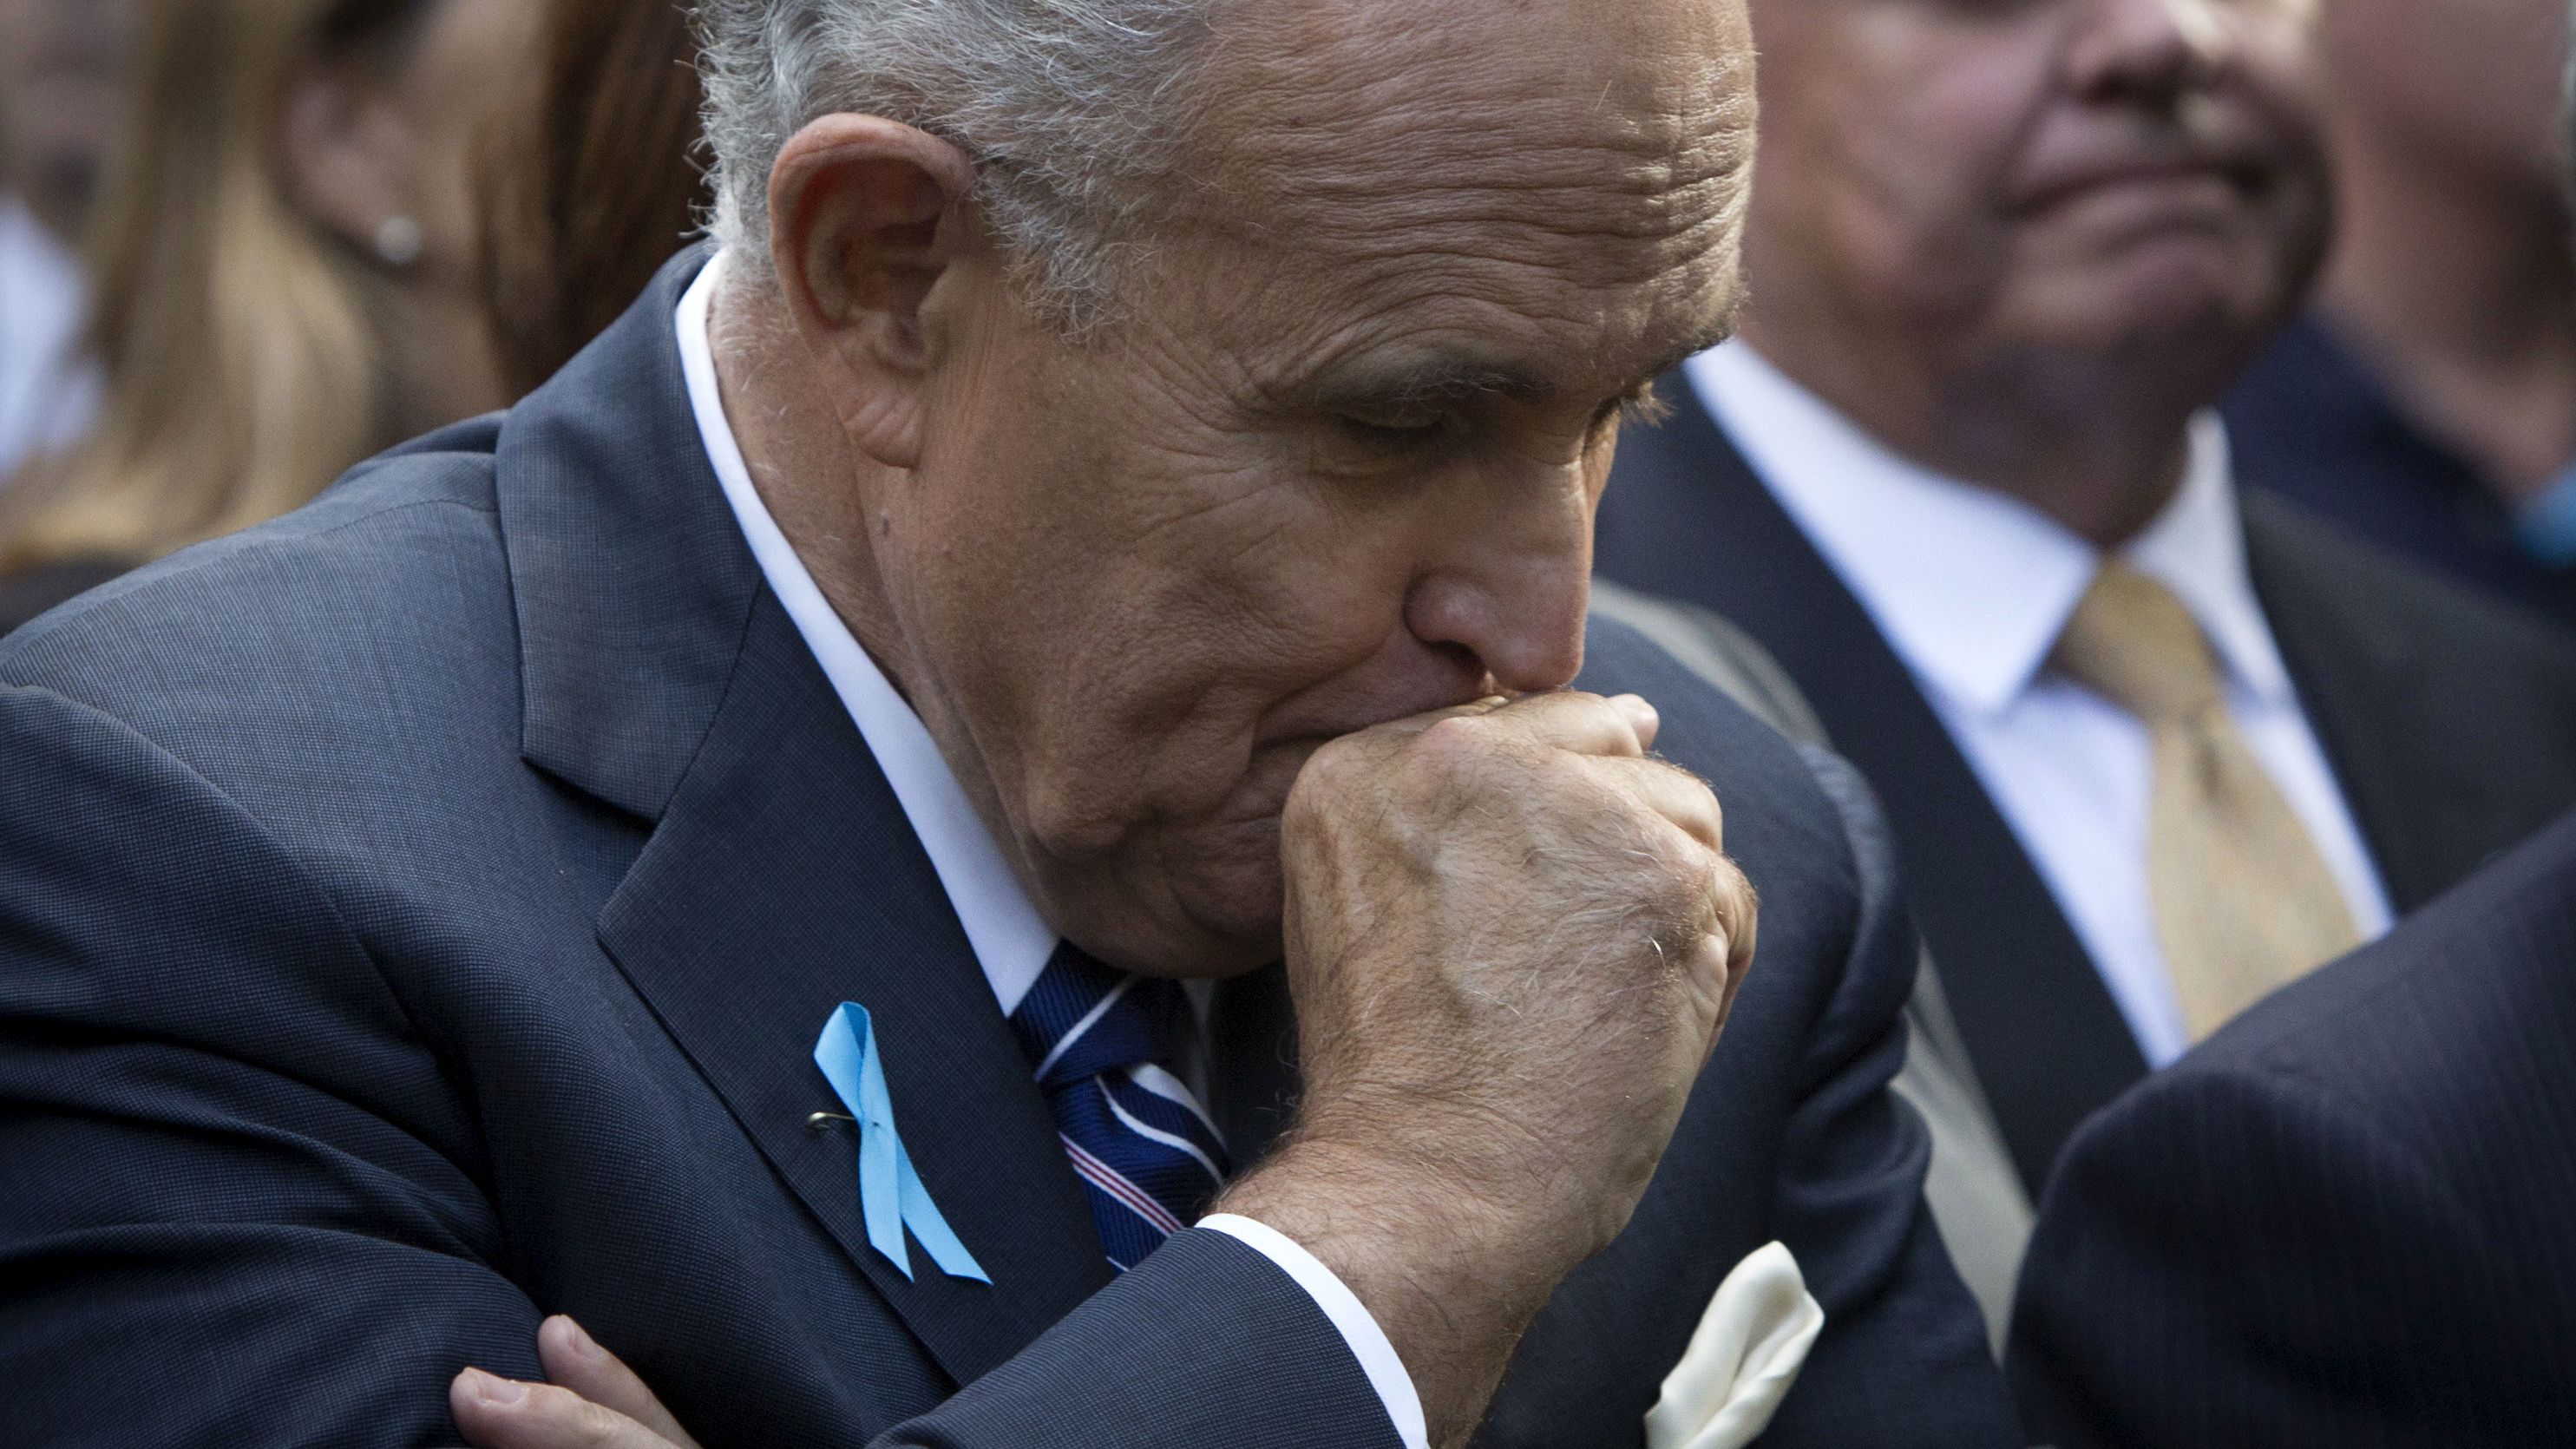 Giuliani pauses during a 2015 ceremony marking the 14th anniversary of the 9/11 attacks.